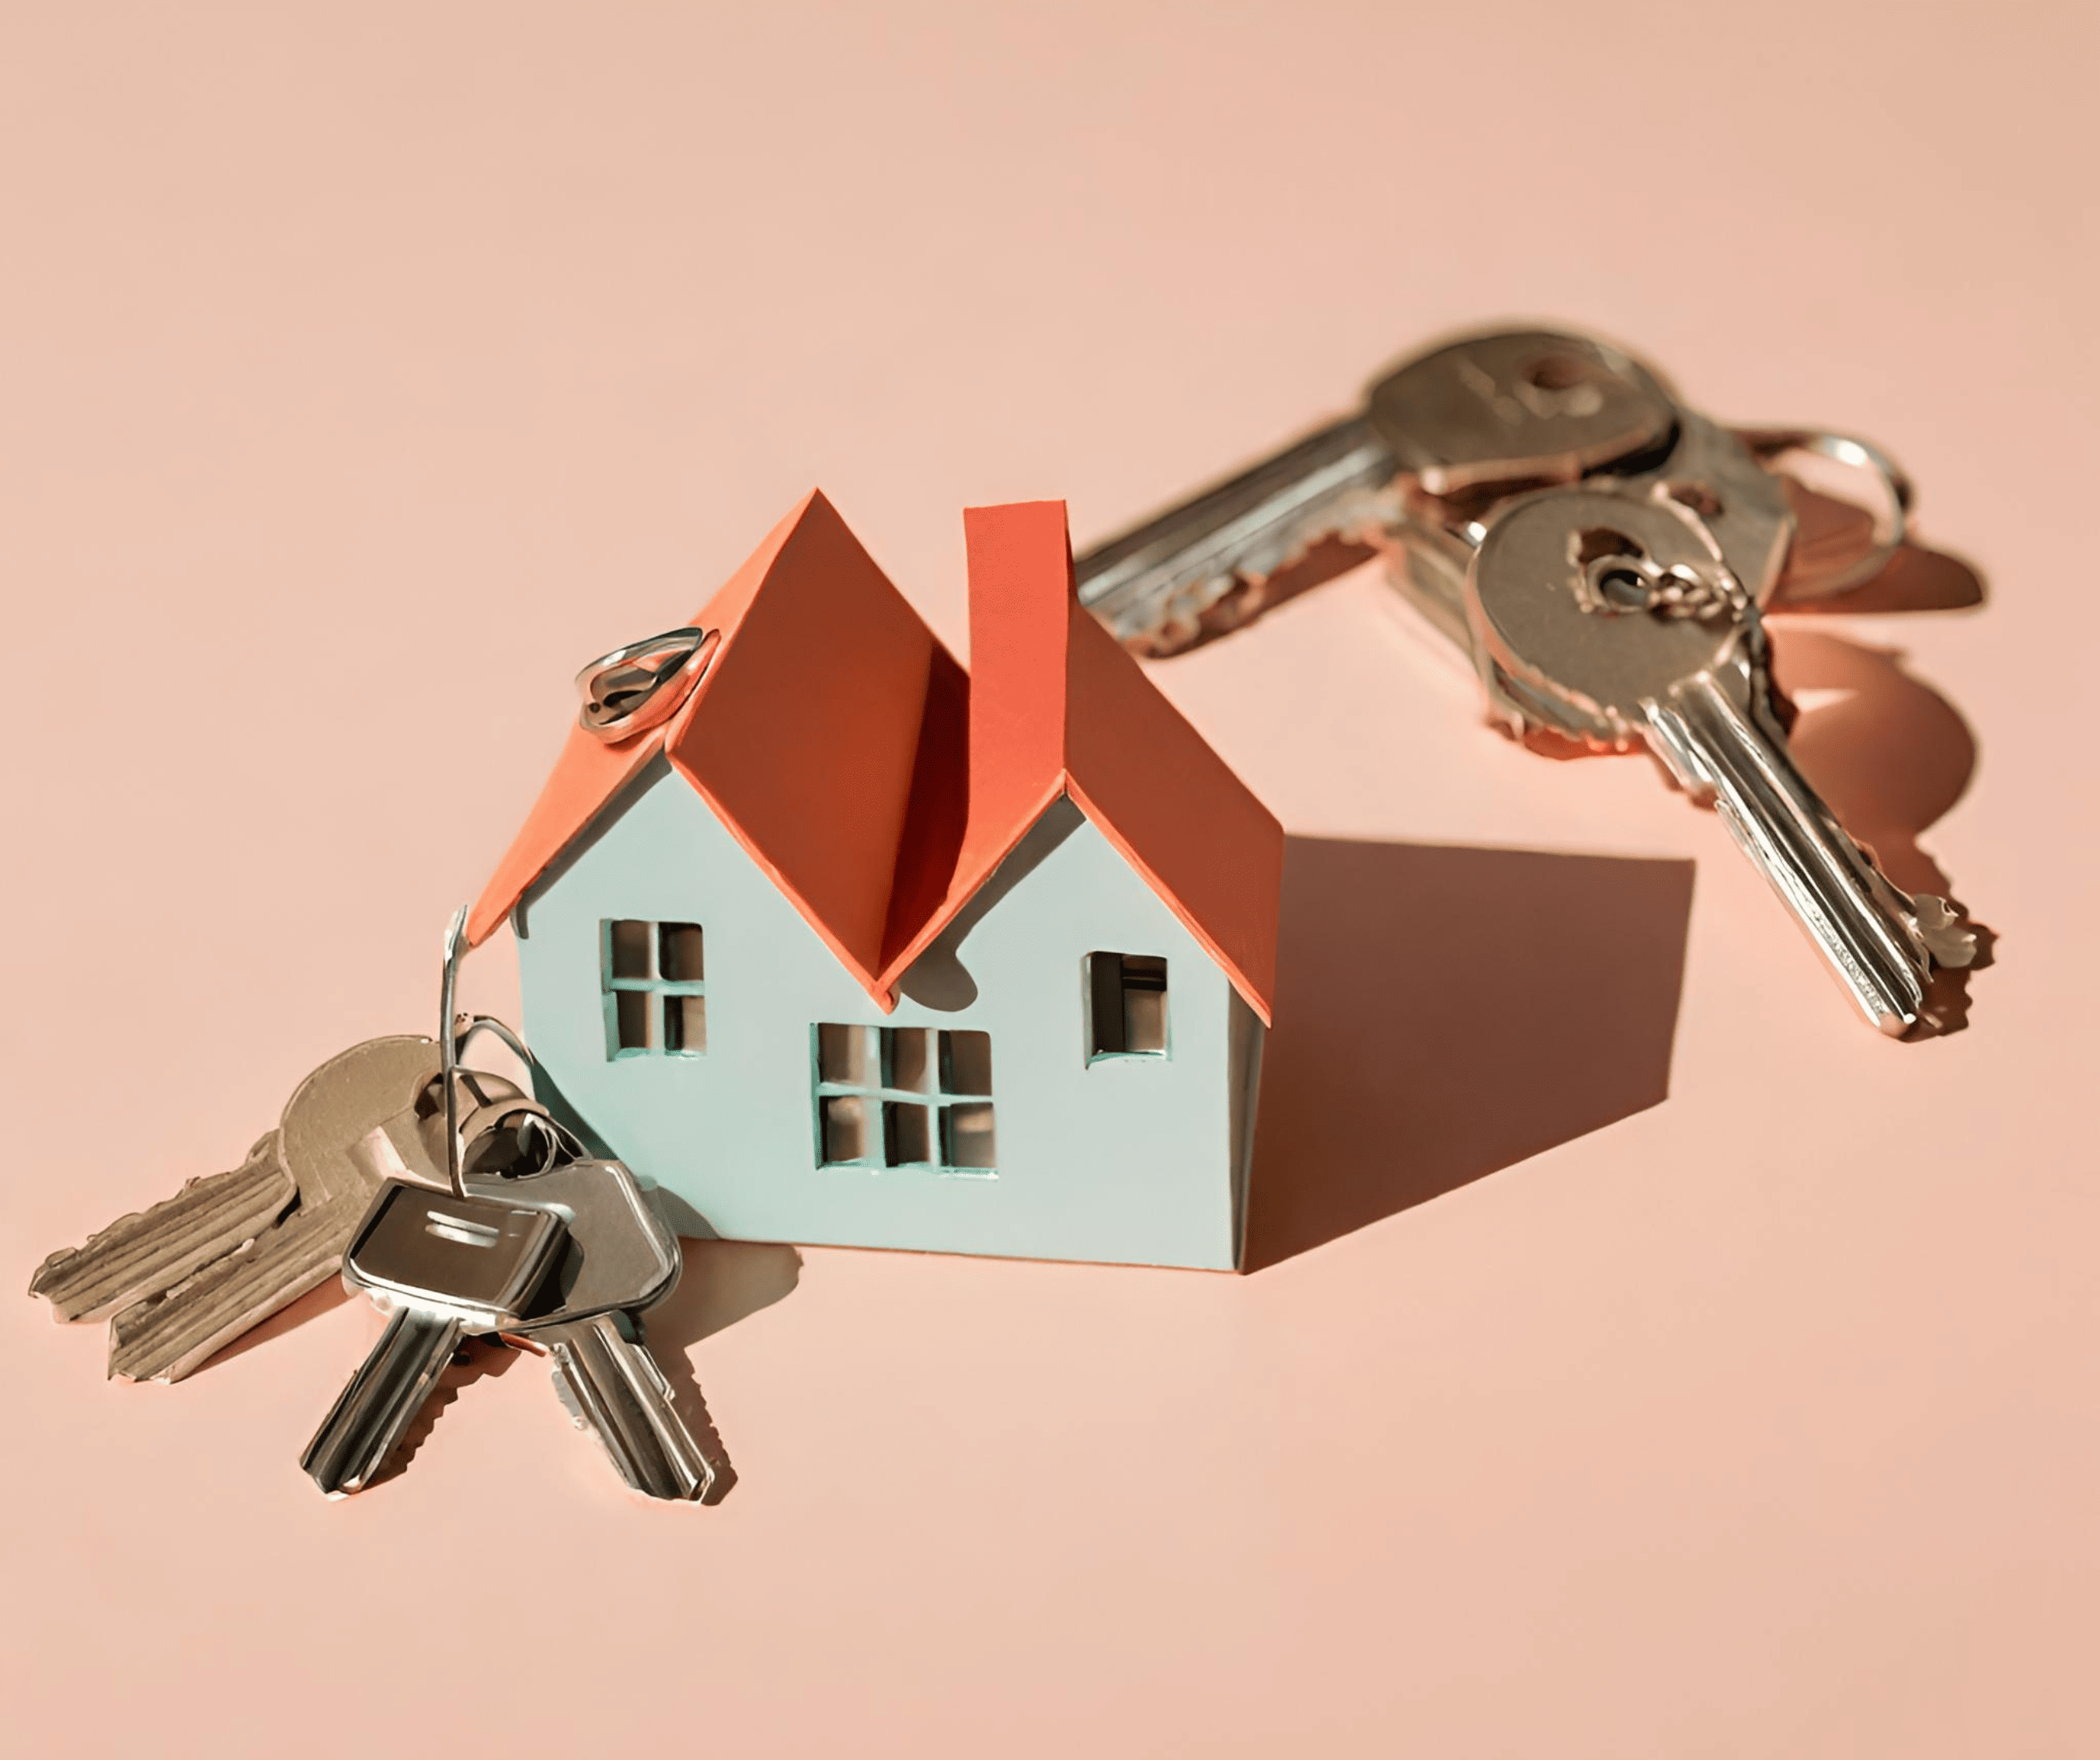 Stock image of keys to a house - Get mortgage advice from a specialist mortgage broker!